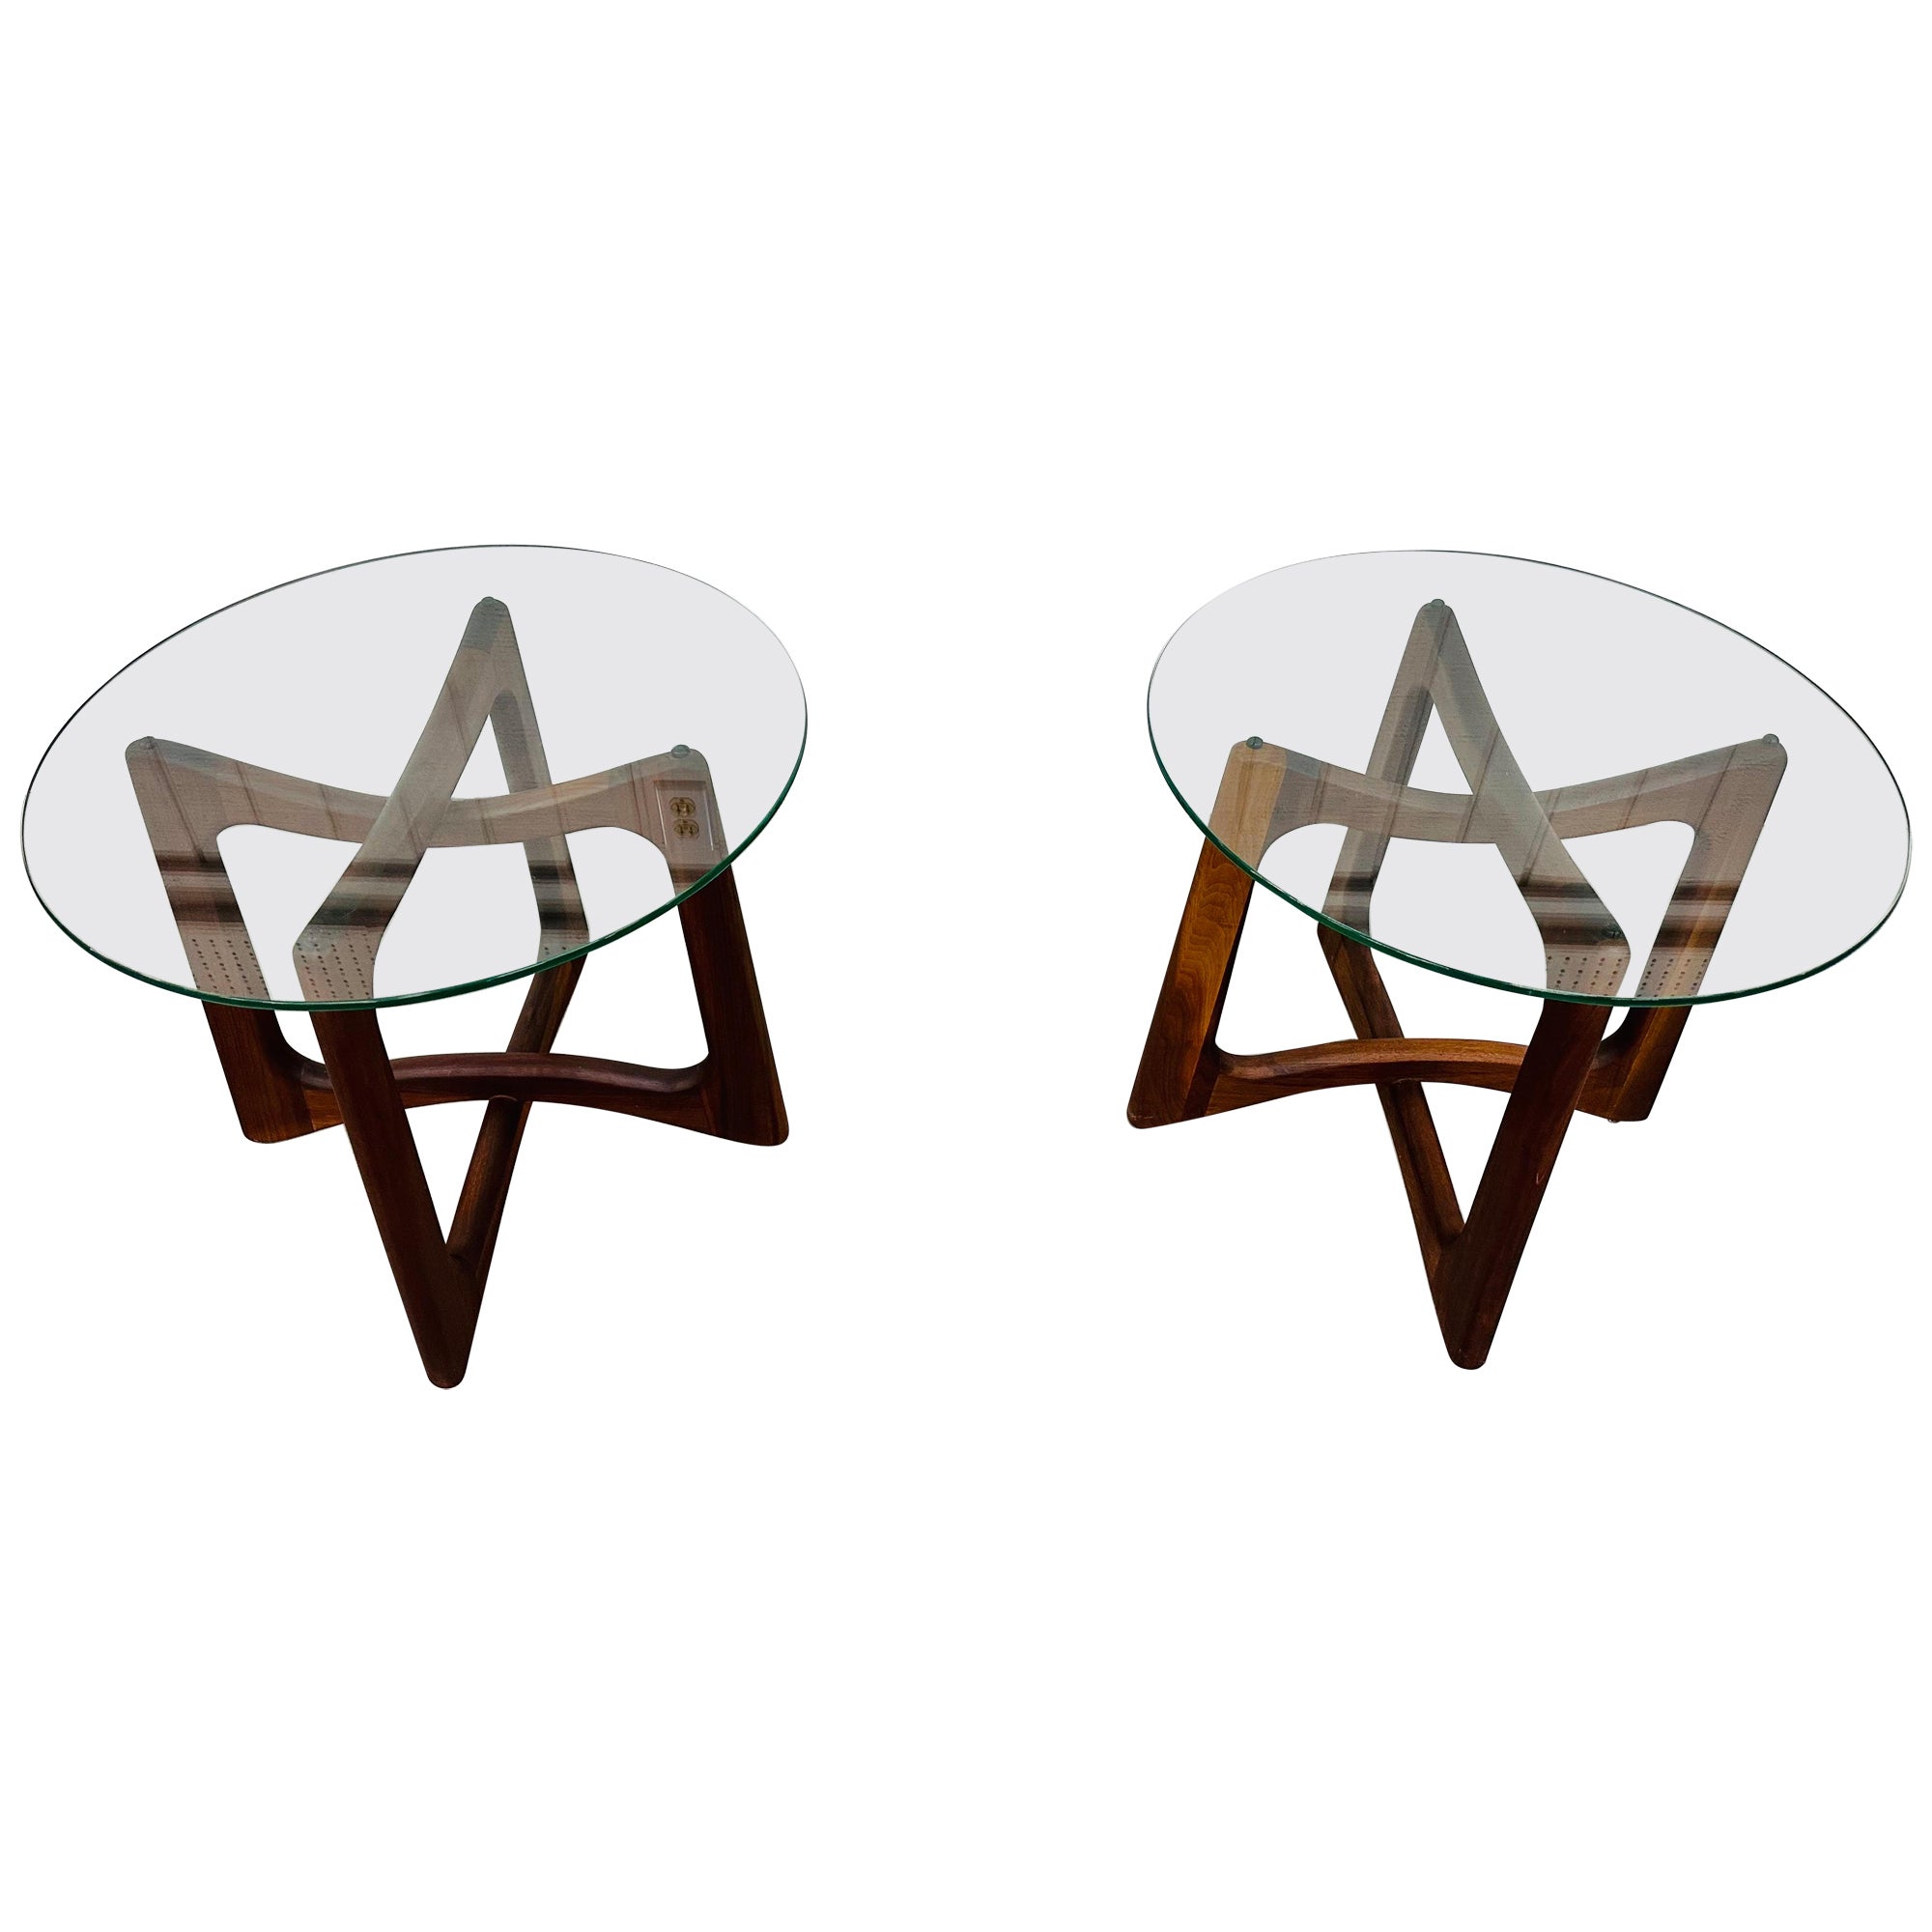 Mid-Century Modern Adrian Pearsall Walnut Glass Top Side Tables - Set of 2 For Sale